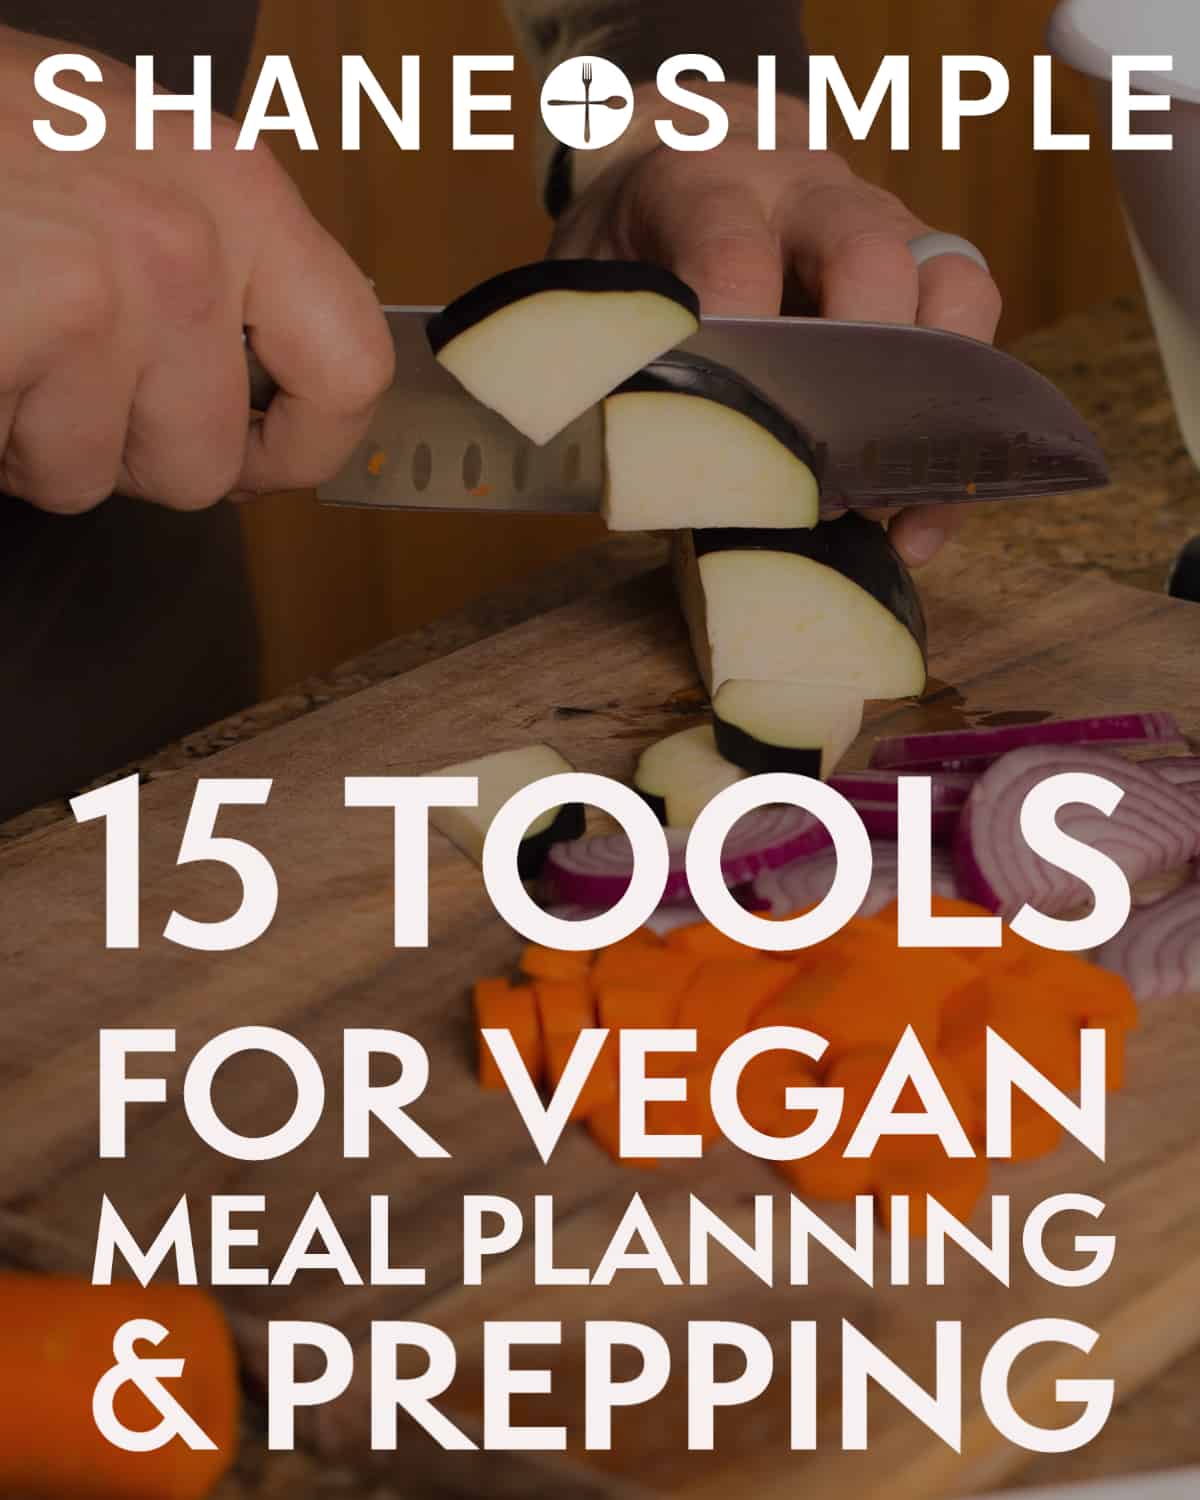 15 tools for vegan meal planning and prepping.